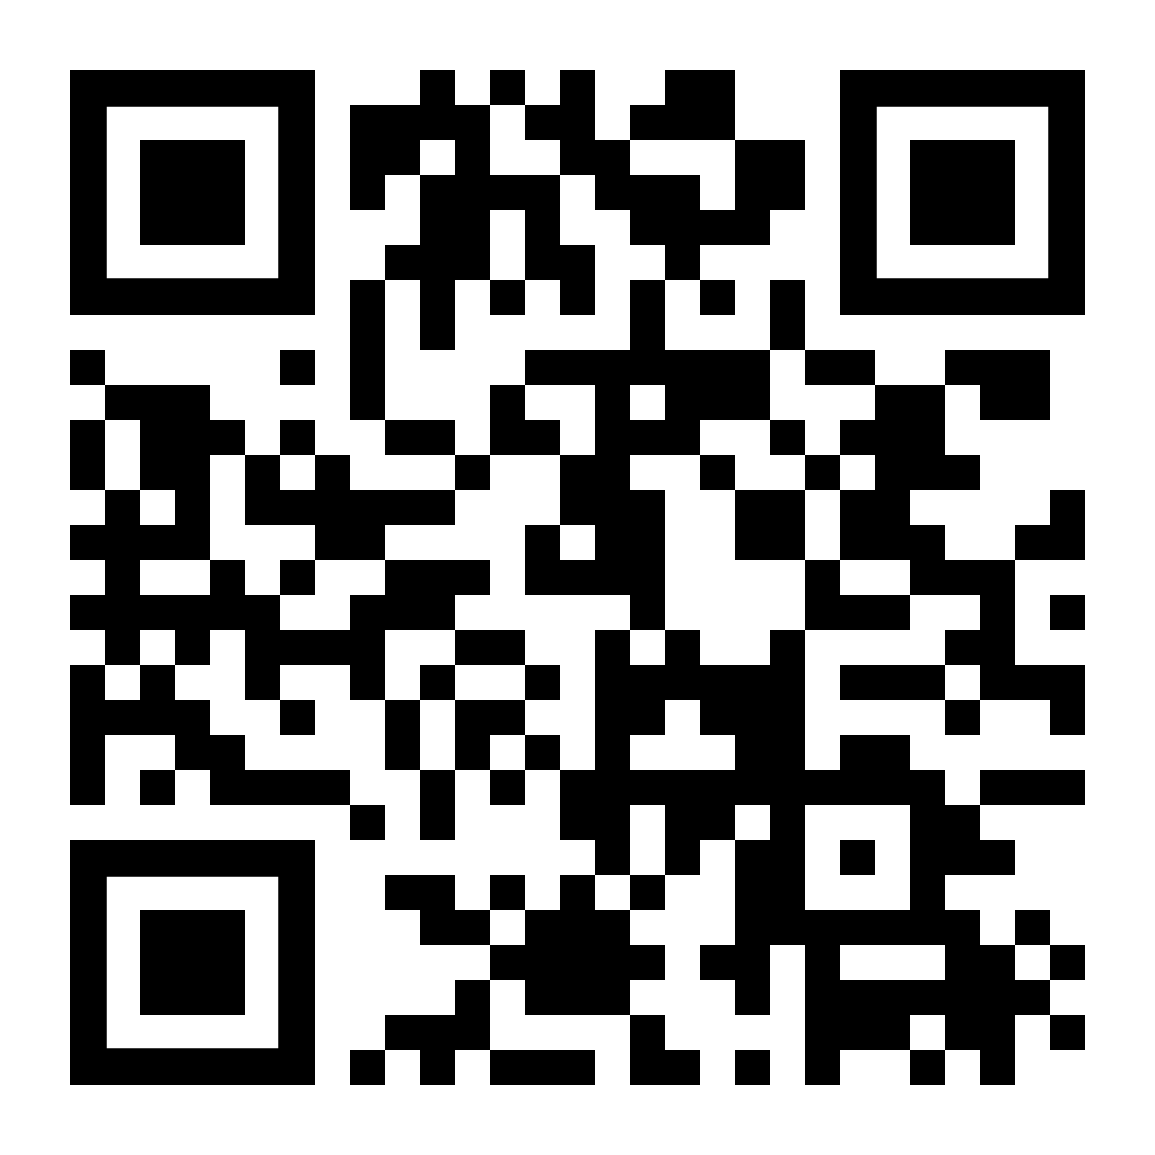 ExtractionQR